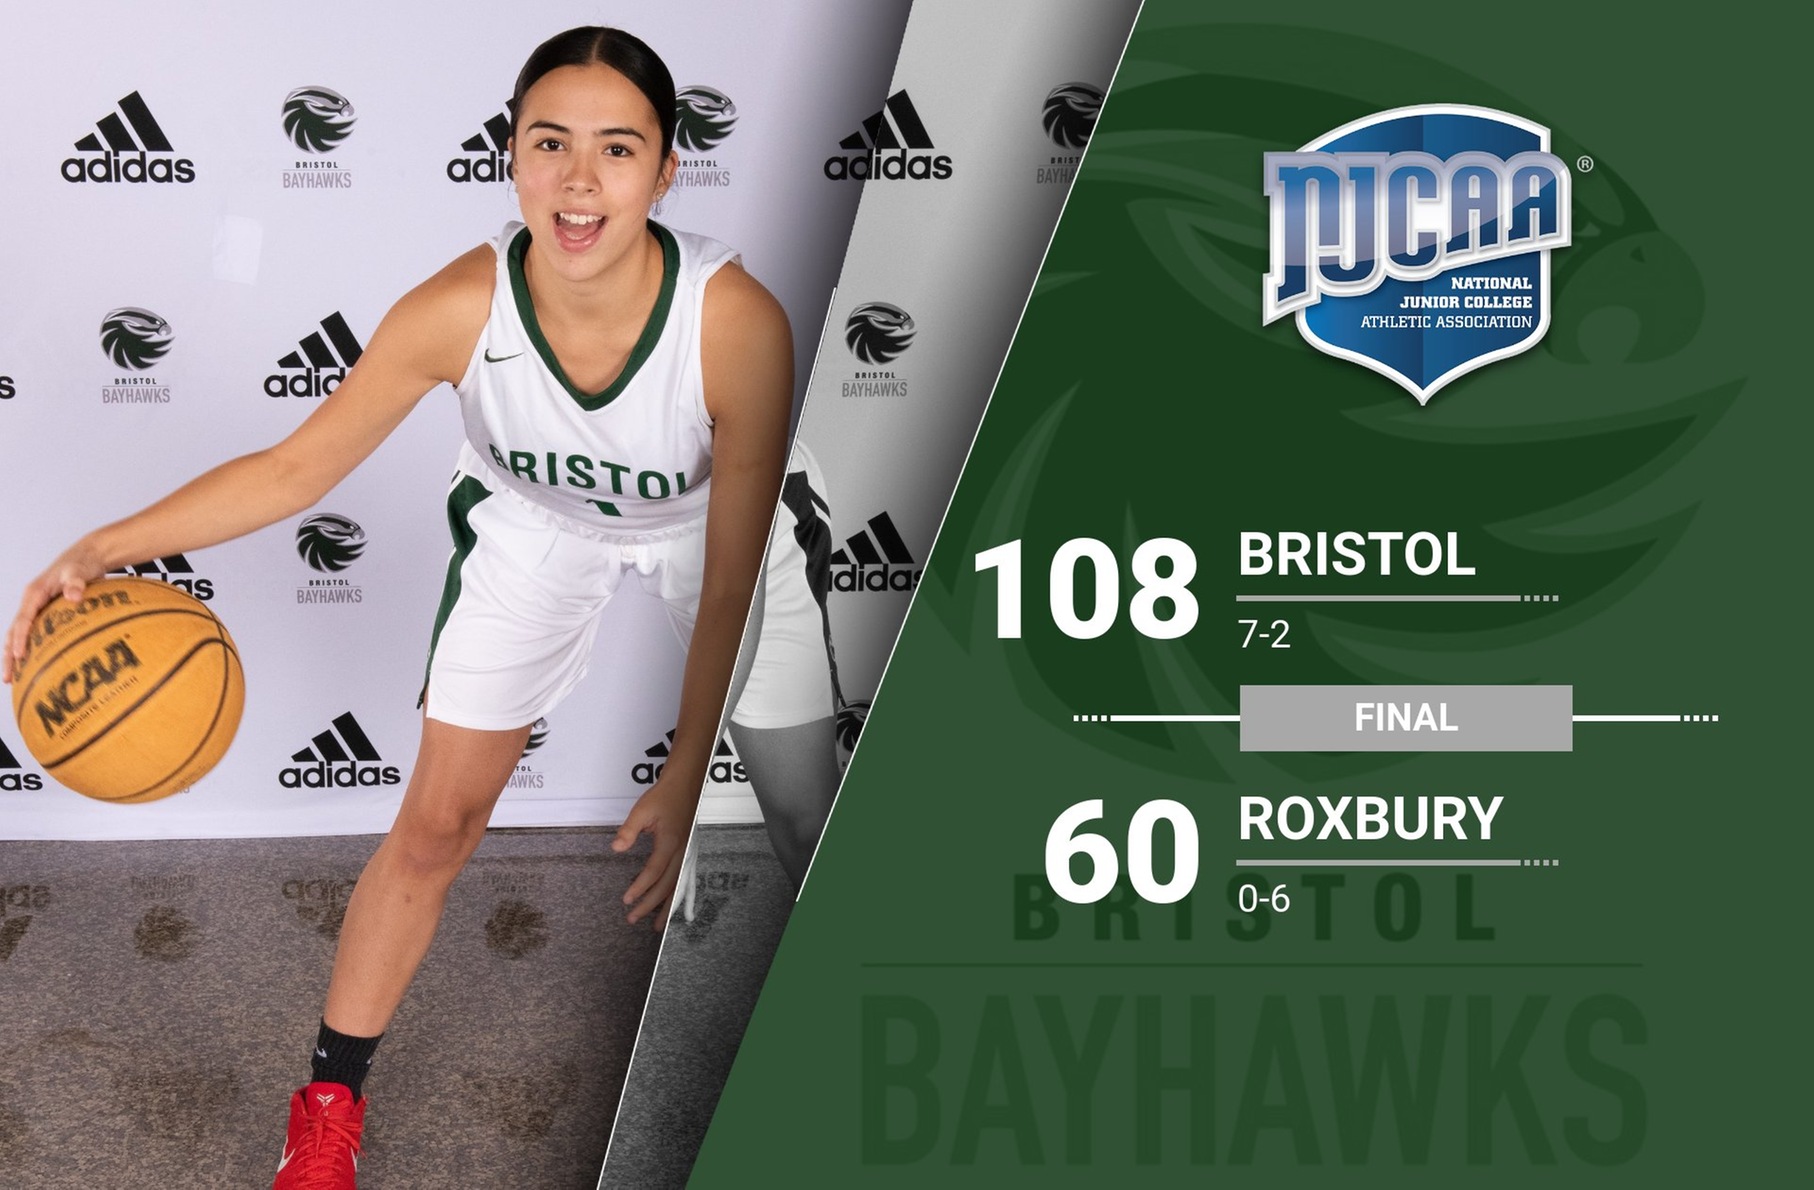 Women's Basketball Improves to 7-2 After a 108-60 WIn Over Roxbury